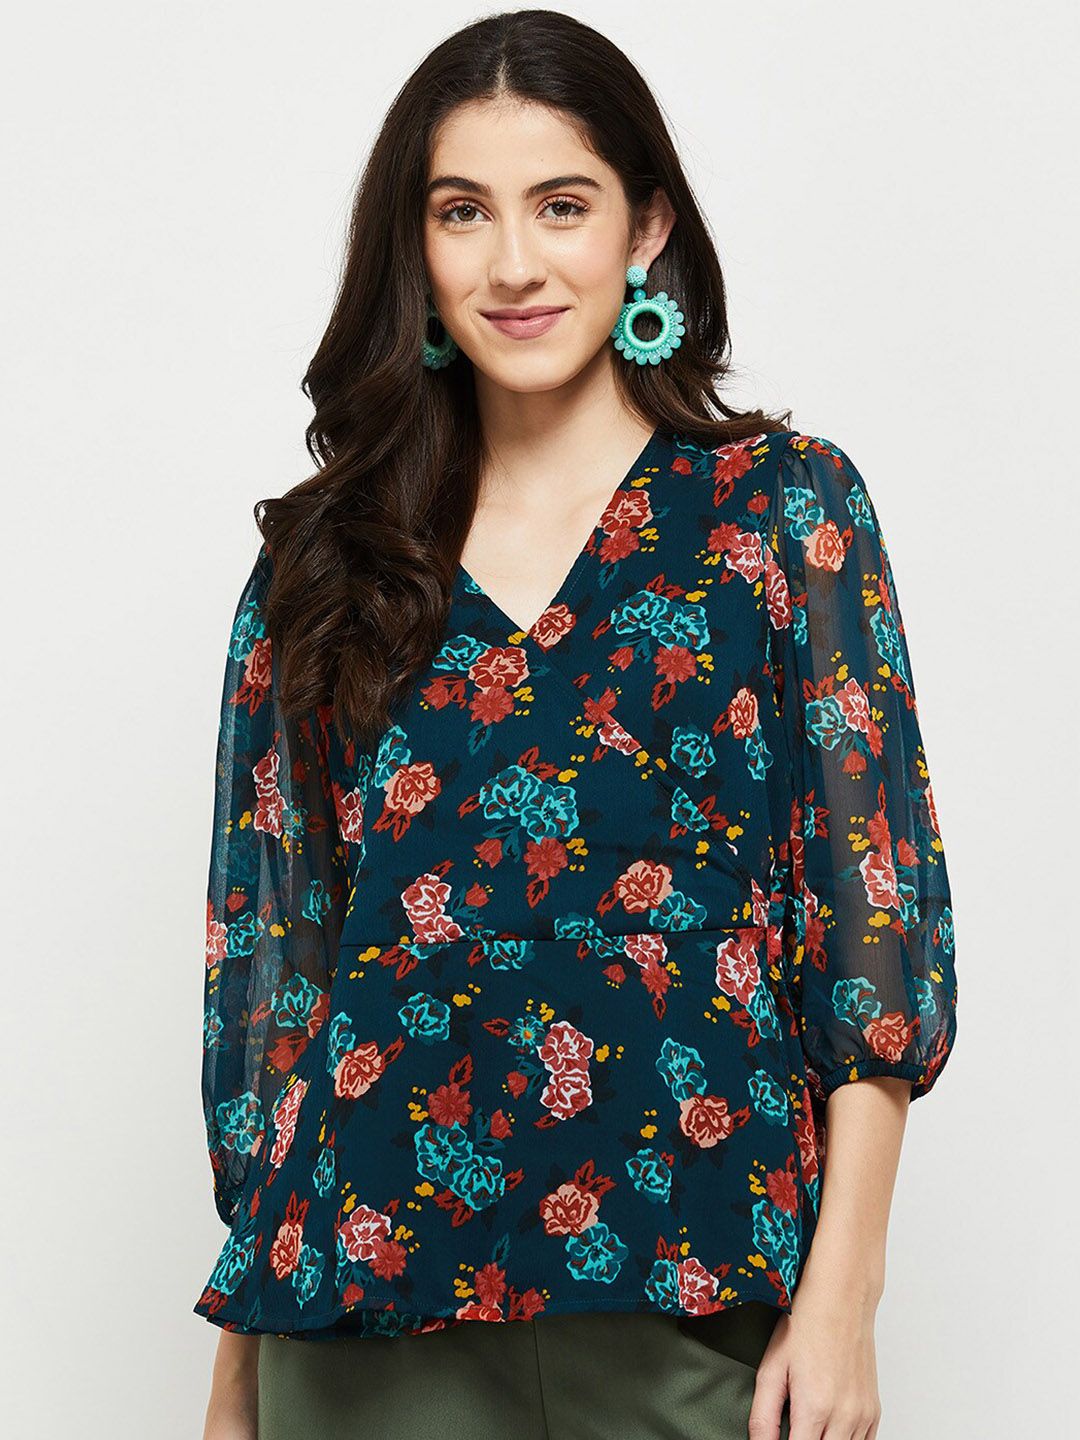 max Women Teal Blue & Red Floral Print Wrap Top Price in India